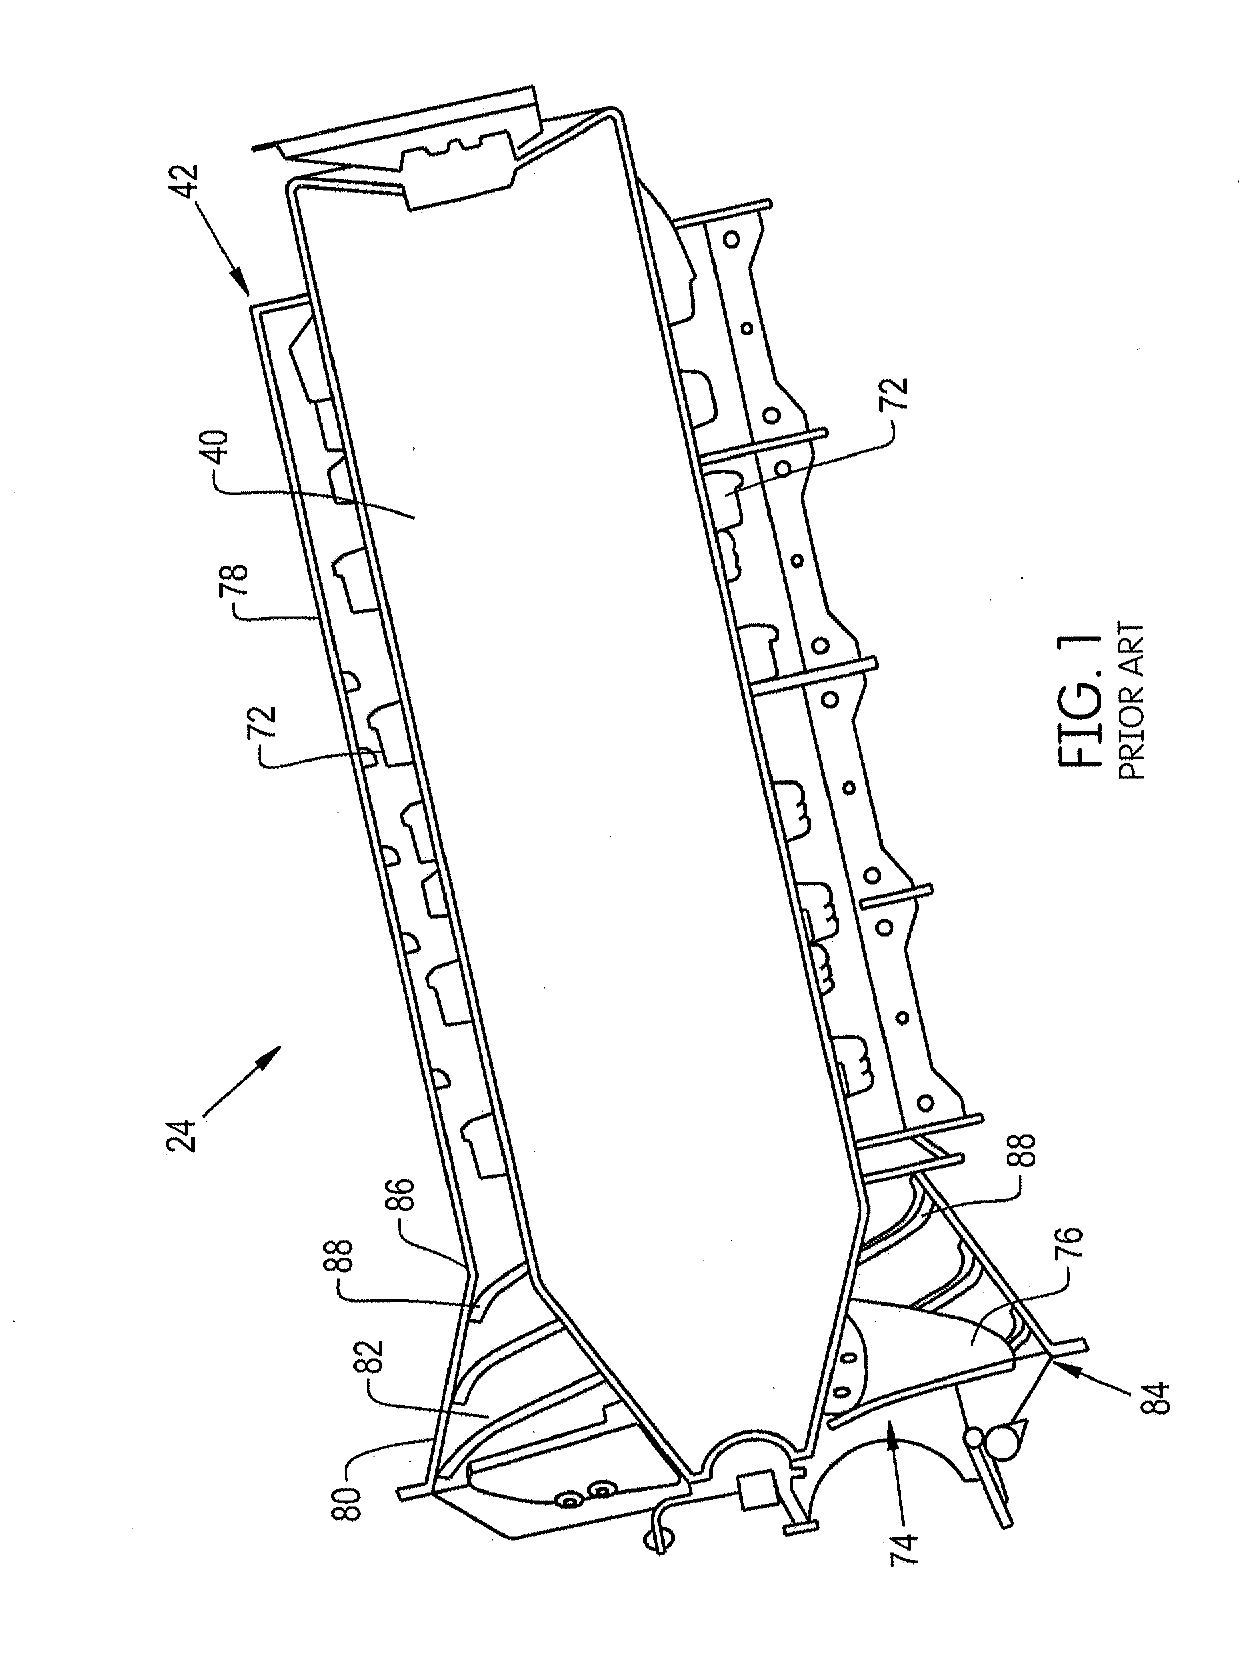 Rotor Cage To Transition Cone Interface For Agricultural Harvester